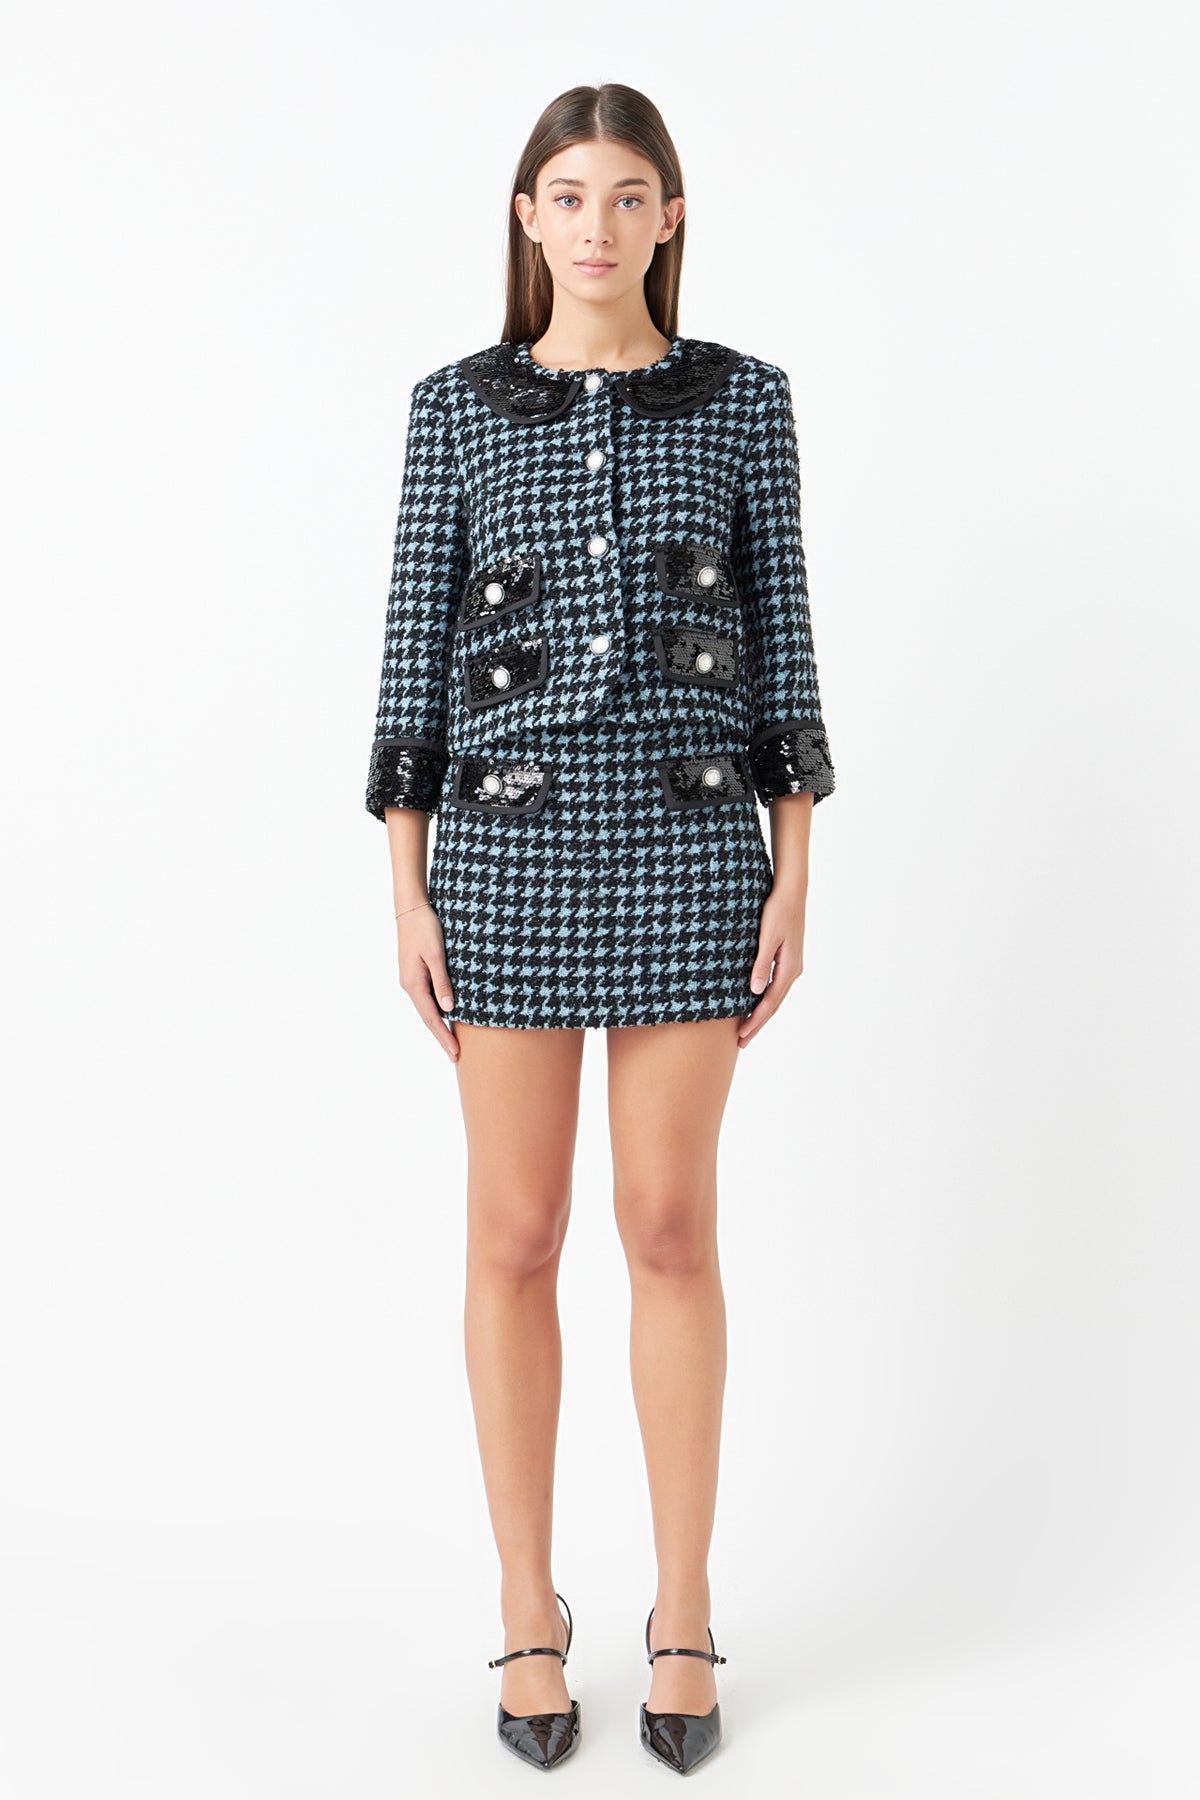 ENDLESS ROSE - Premium Houndstooth Cropped Jacket - JACKETS available at Objectrare